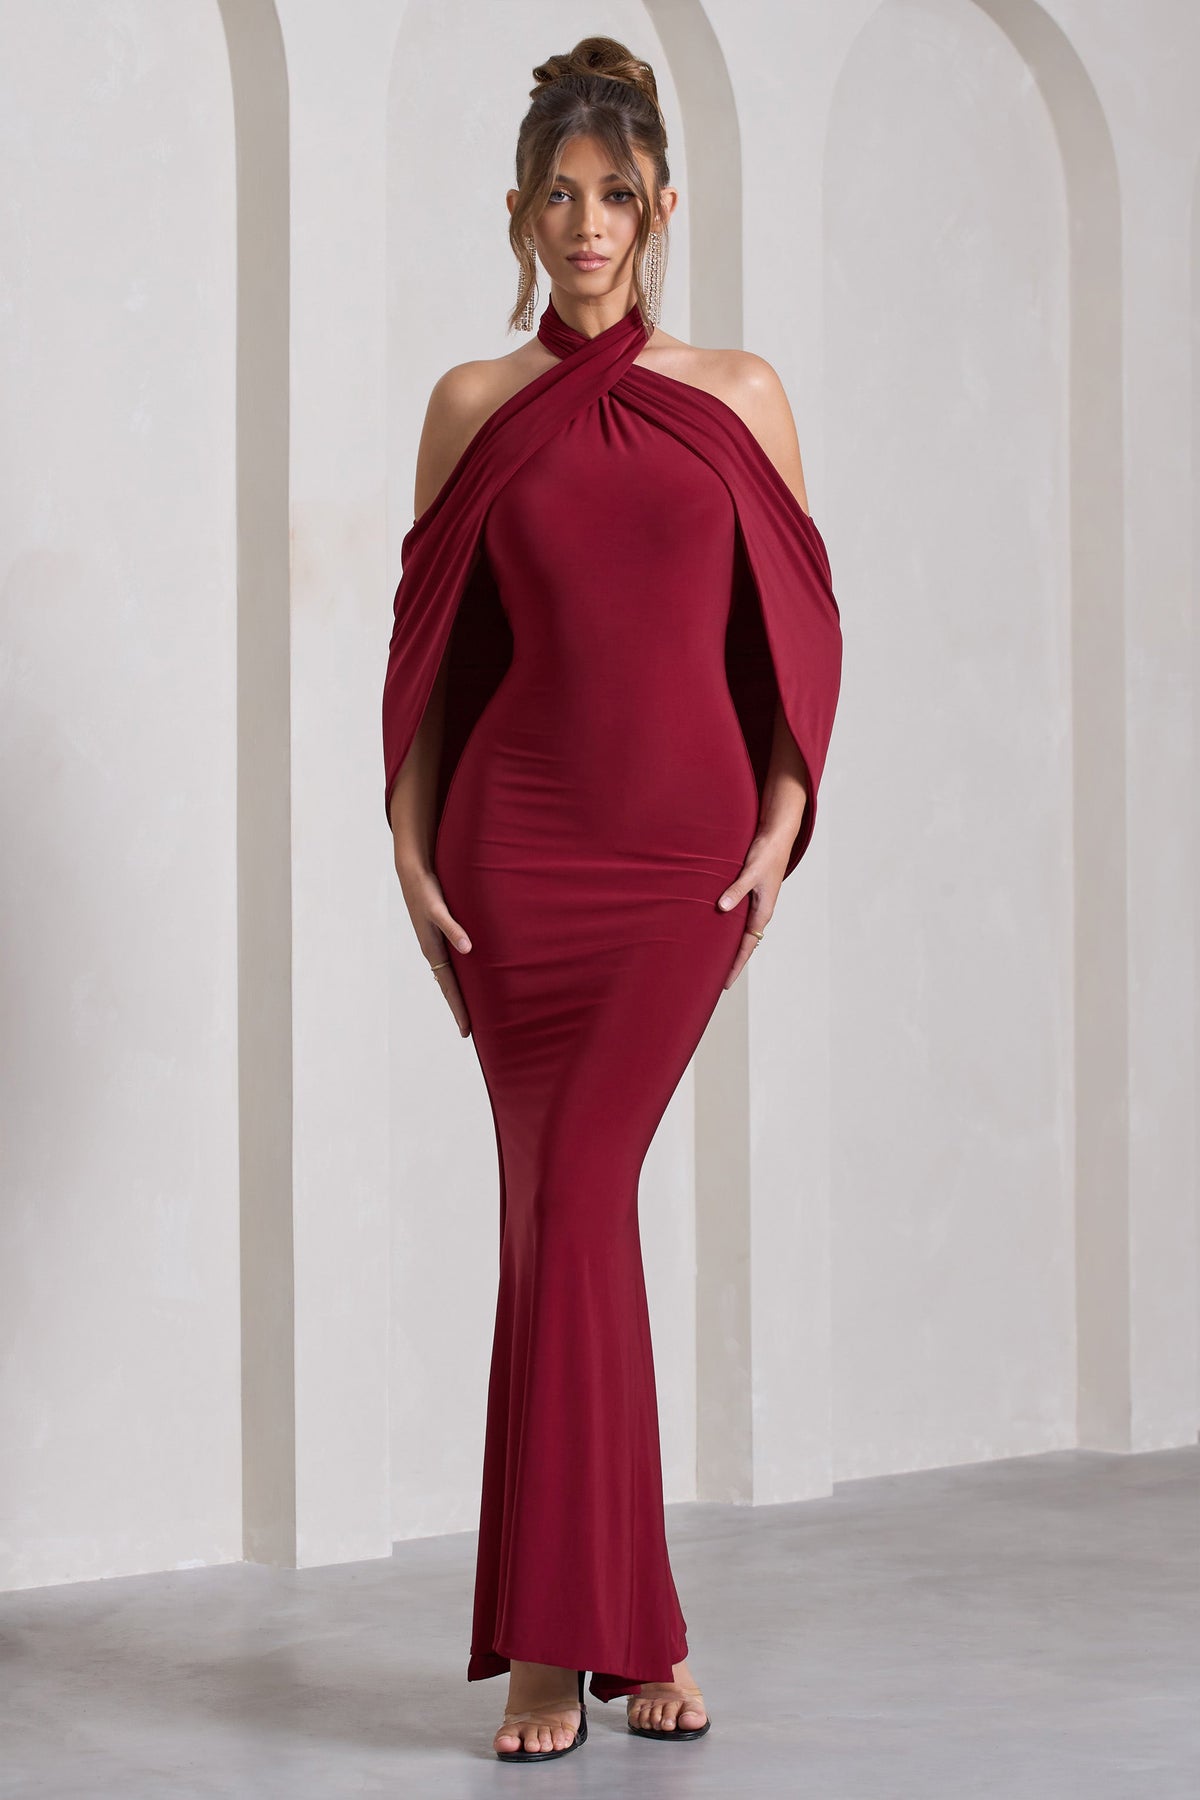 Club L Crossed USA Cape - Revelation London Red – Maxi With Halter-Neck Dress Fishtail Berry